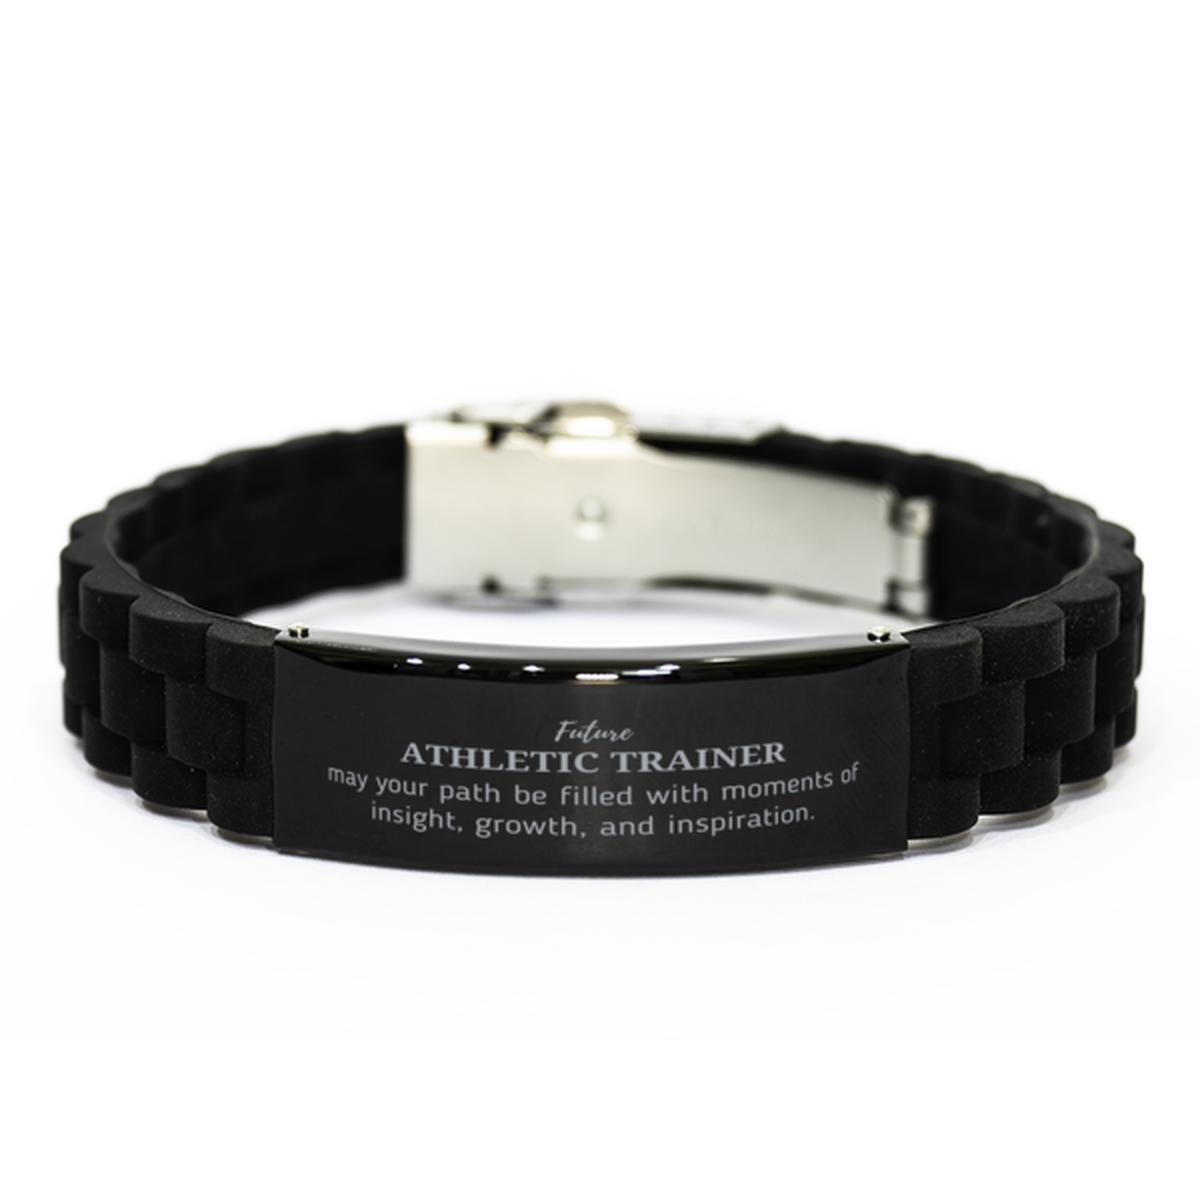 Future Athletic Trainer Gifts, May your path be filled with moments of insight, Graduation Gifts for New Athletic Trainer, Christmas Unique Black Glidelock Clasp Bracelet For Men, Women, Friends